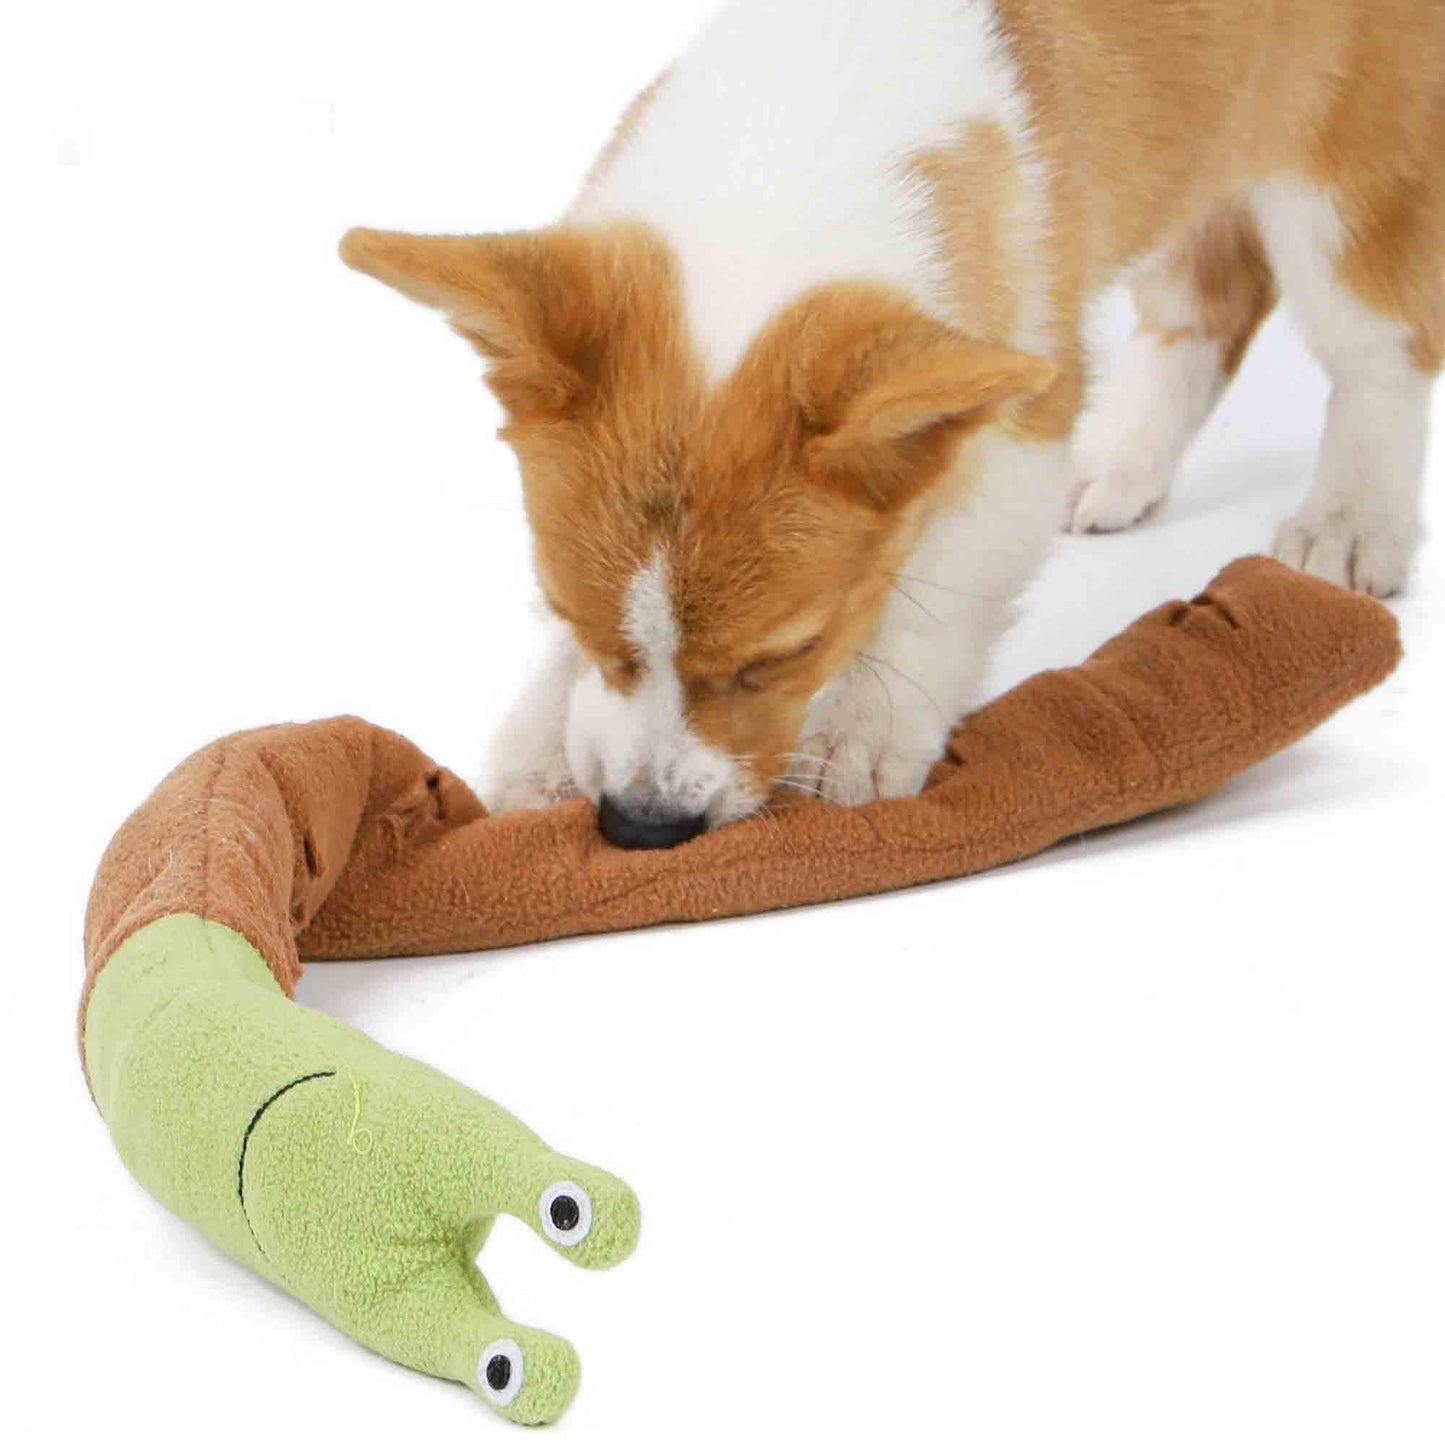 Dog sniffing Snail Rollup Snuffle Dog Toy from Floyd & Fleet